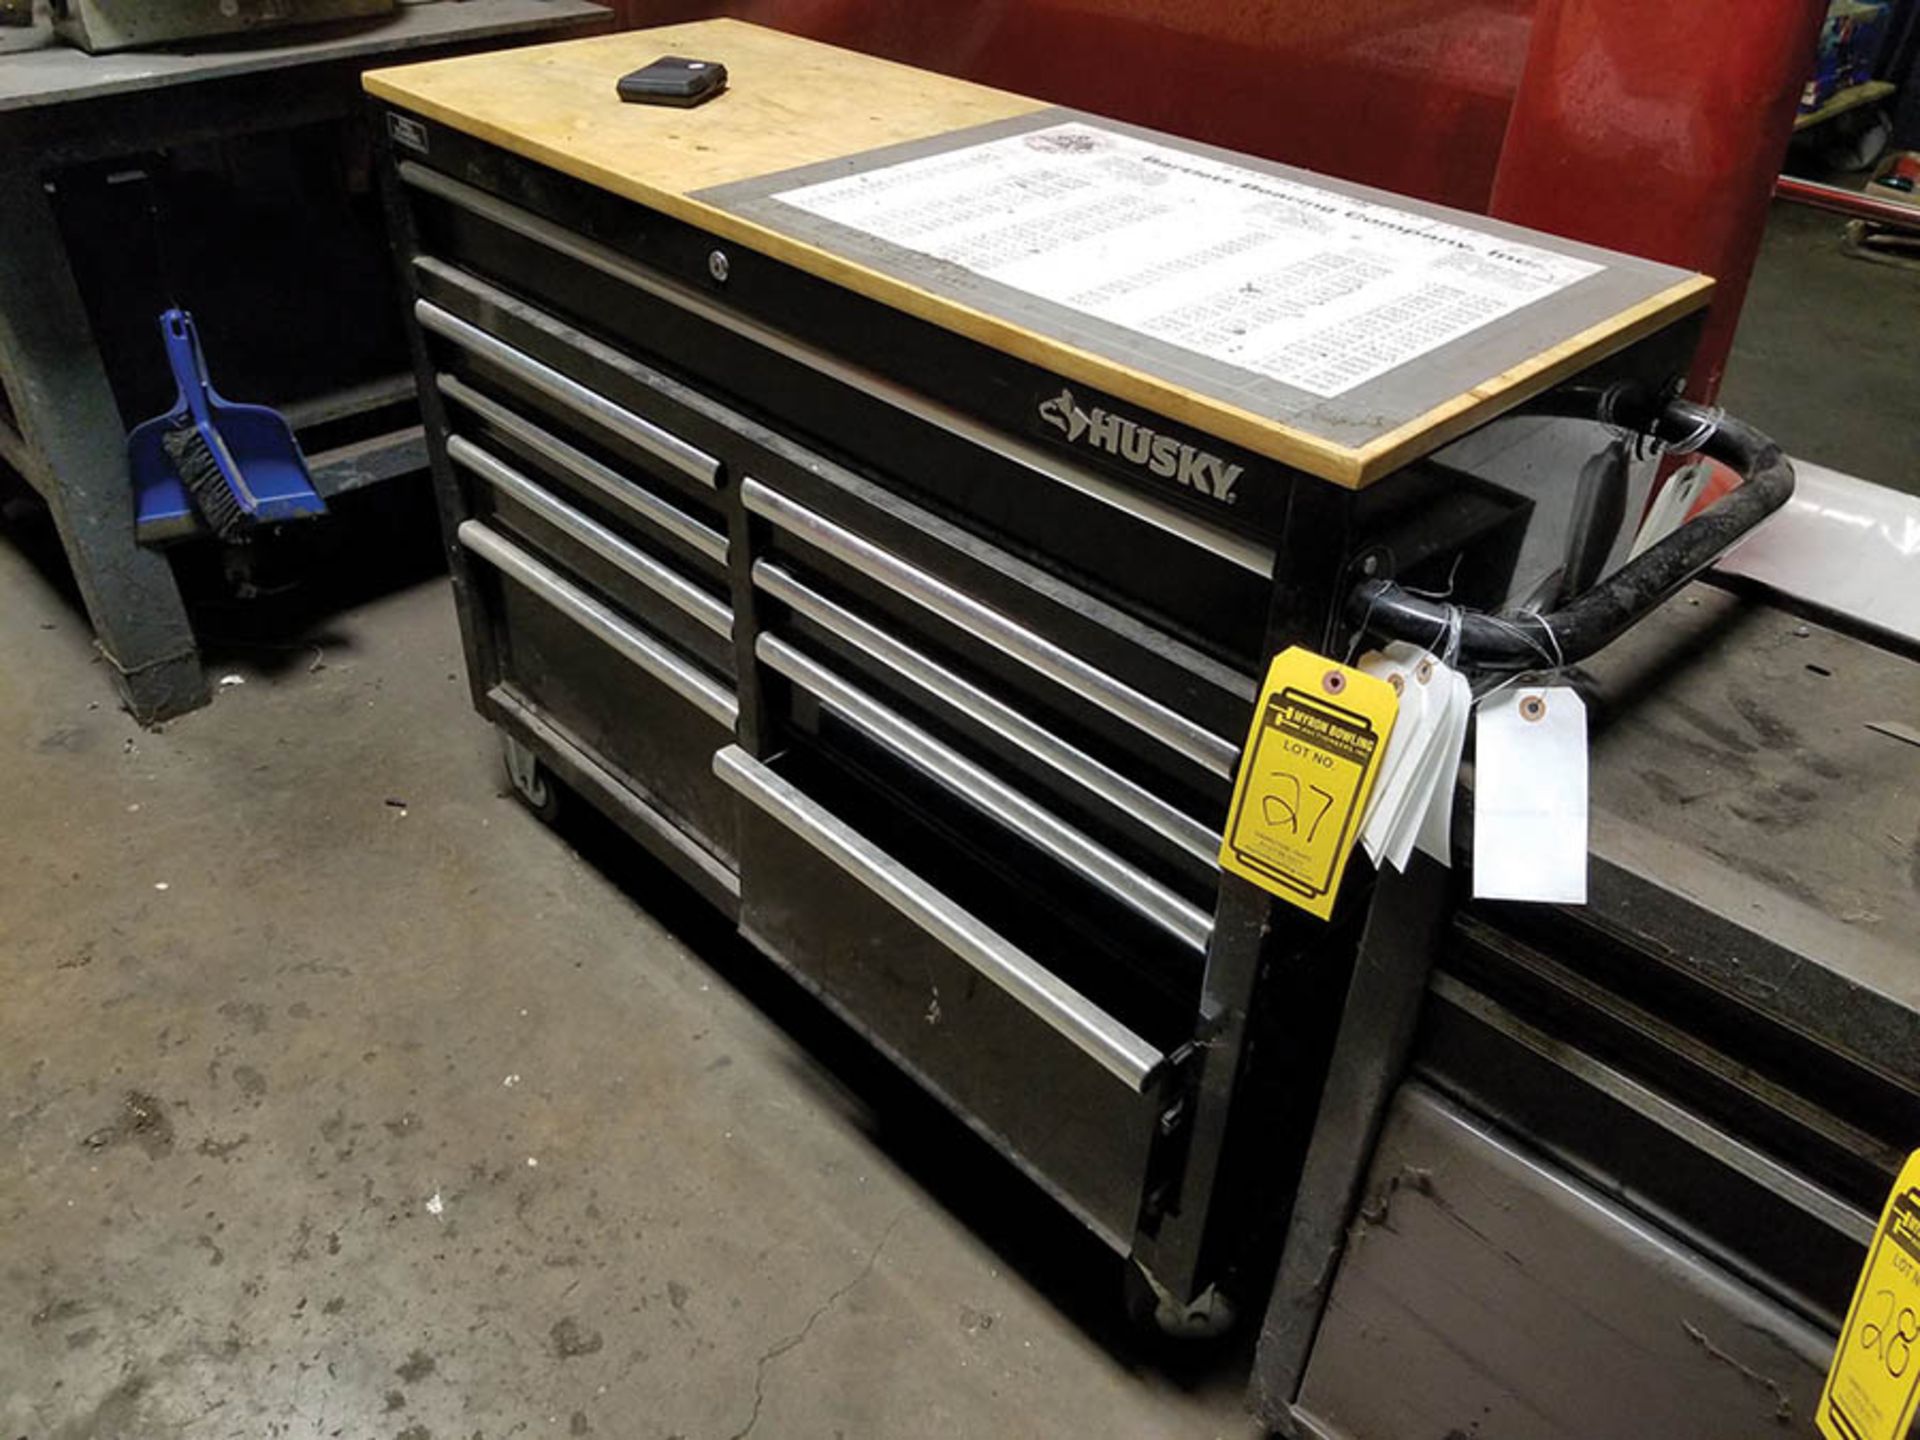 HUSKY 9 DRAWER ROLLING WORK BENCH TOOL CABINETS WITH TOOLS; HAMMERS, SCREWDRIVERS, WRENCHES, GLOVES, - Image 2 of 8